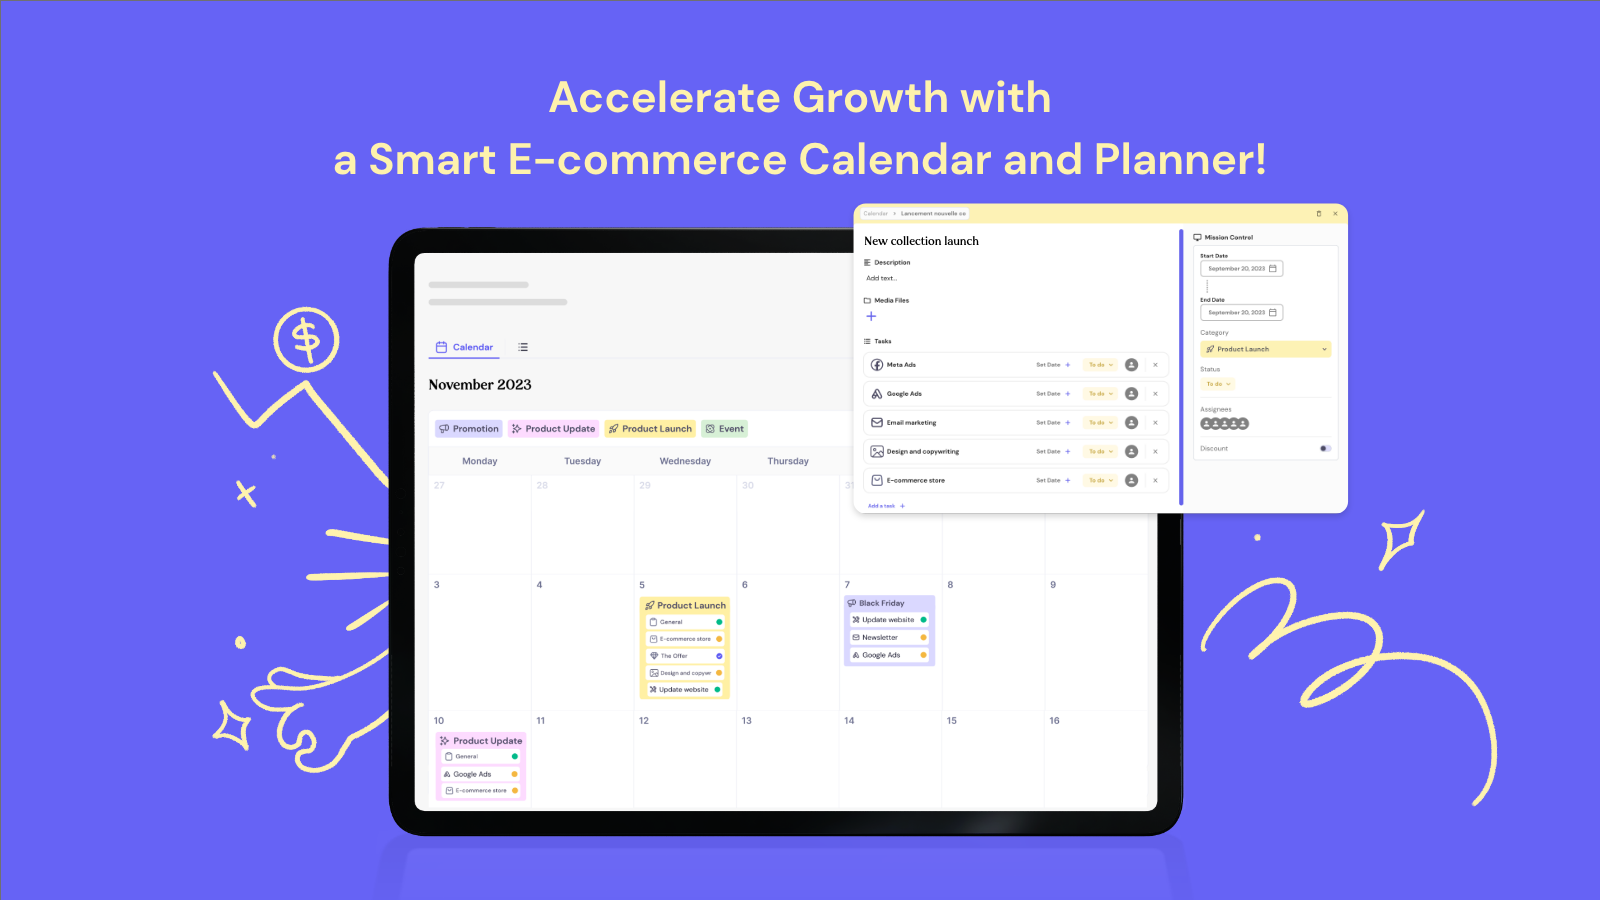 Accelerate Growth with a smart E-commerce Calendar and Planner!